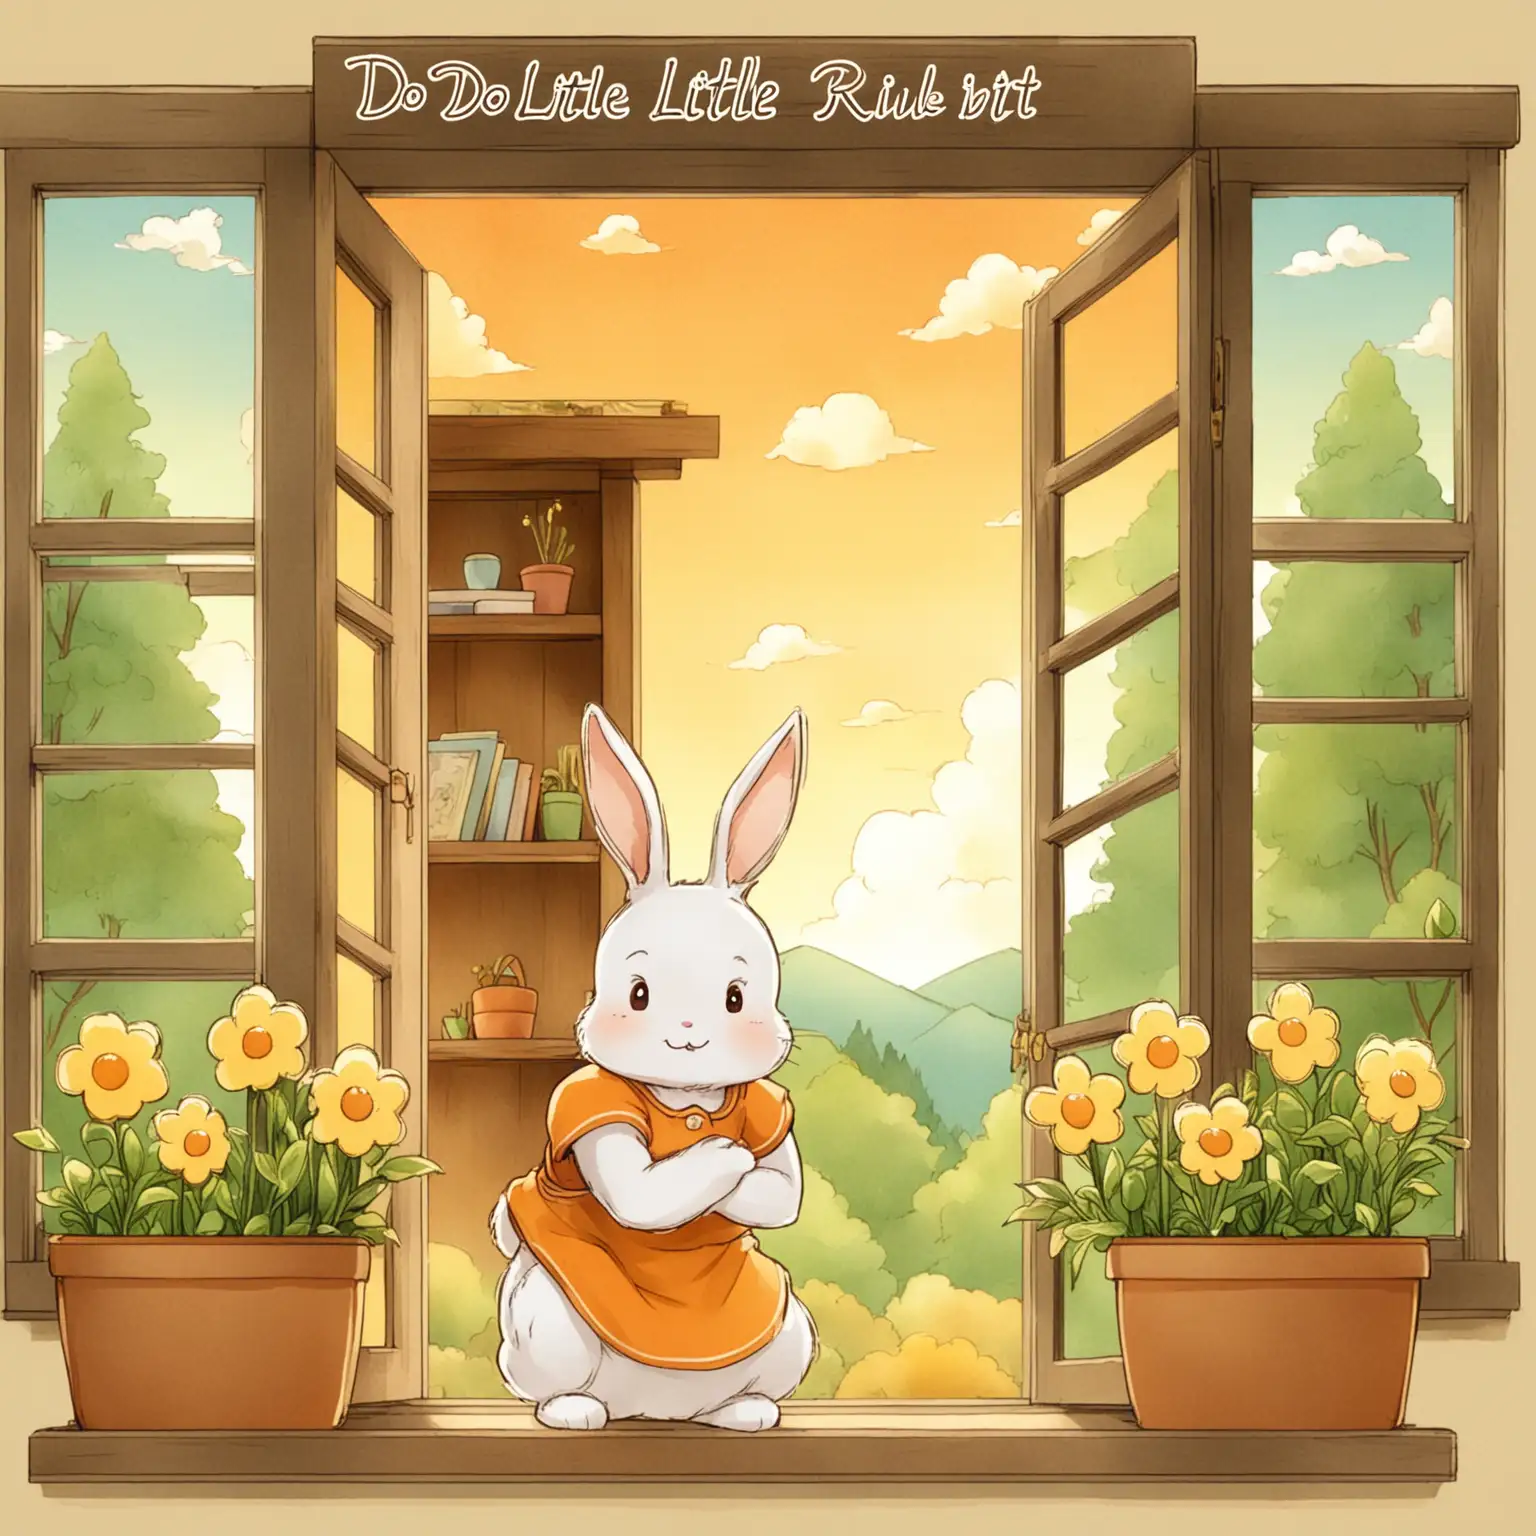 Color: Use warm orange-yellow as the main light source to create a cozy morning atmosphere. The house, forest, and hills use rich green and brown colors, and the sky is clear blue with white clouds gently outlined in white. Details: Design Mi Mi's little rabbit image to be cute and confident, with a determined gaze and a smile full of anticipation. The broom can be exaggerated a bit for contrast with Mi Mi's physique, adding playfulness. The house details should be warm, such as a warm light coming out of the door gap and flower pots on the windowsill. Font: Handwritten title should be lively and clear, and the small text introduction should use a soft font to ensure reading comfort. Text: Do one's own things